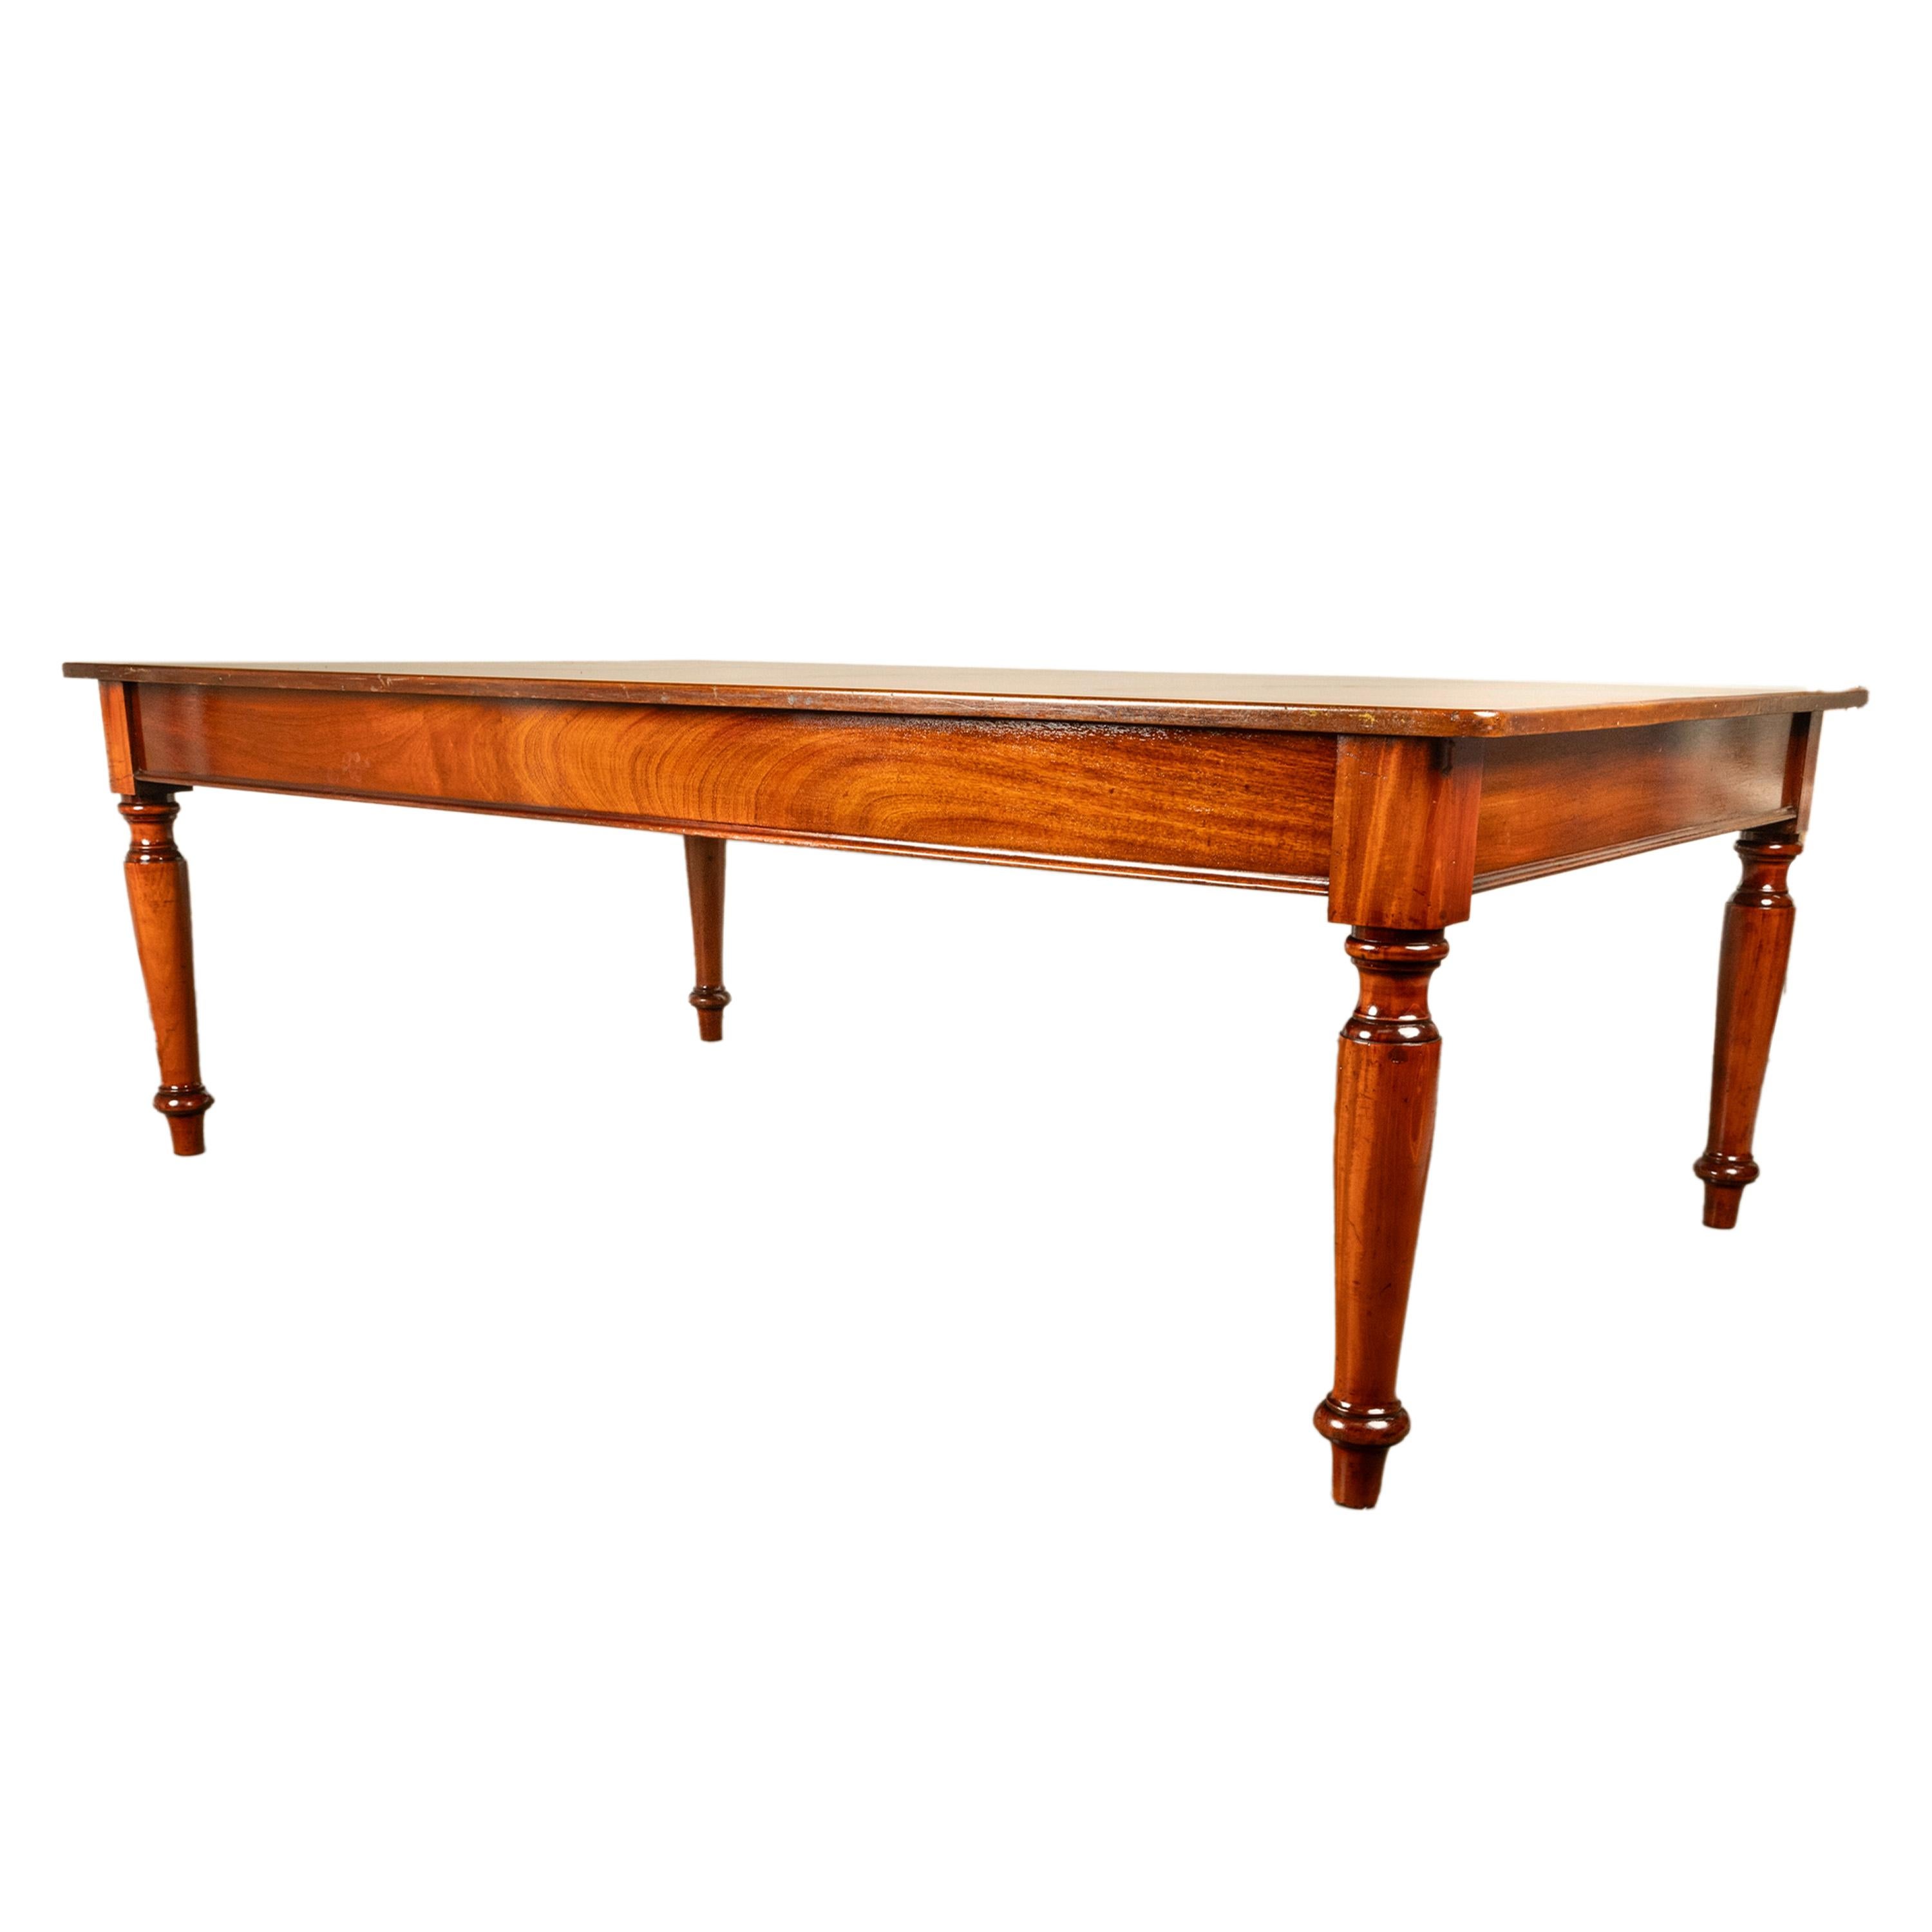 Antique Monumental 19th Century Mahogany Library Conference Dining Table 1860 For Sale 7